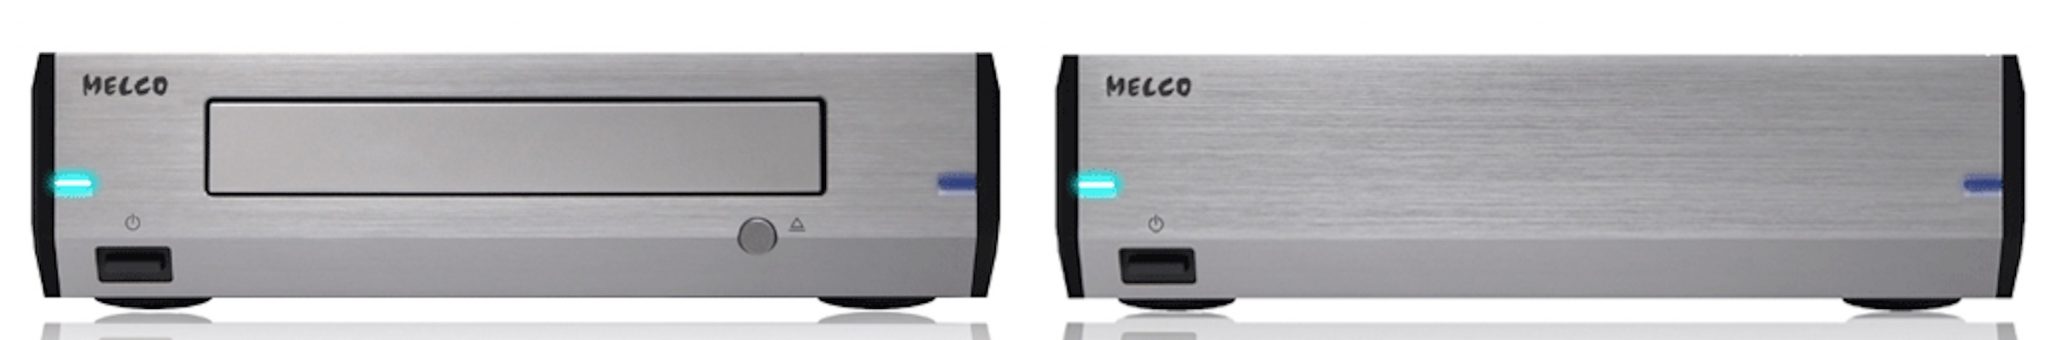 Melco D100 CD Drive and E100 Storage Expansion Drive